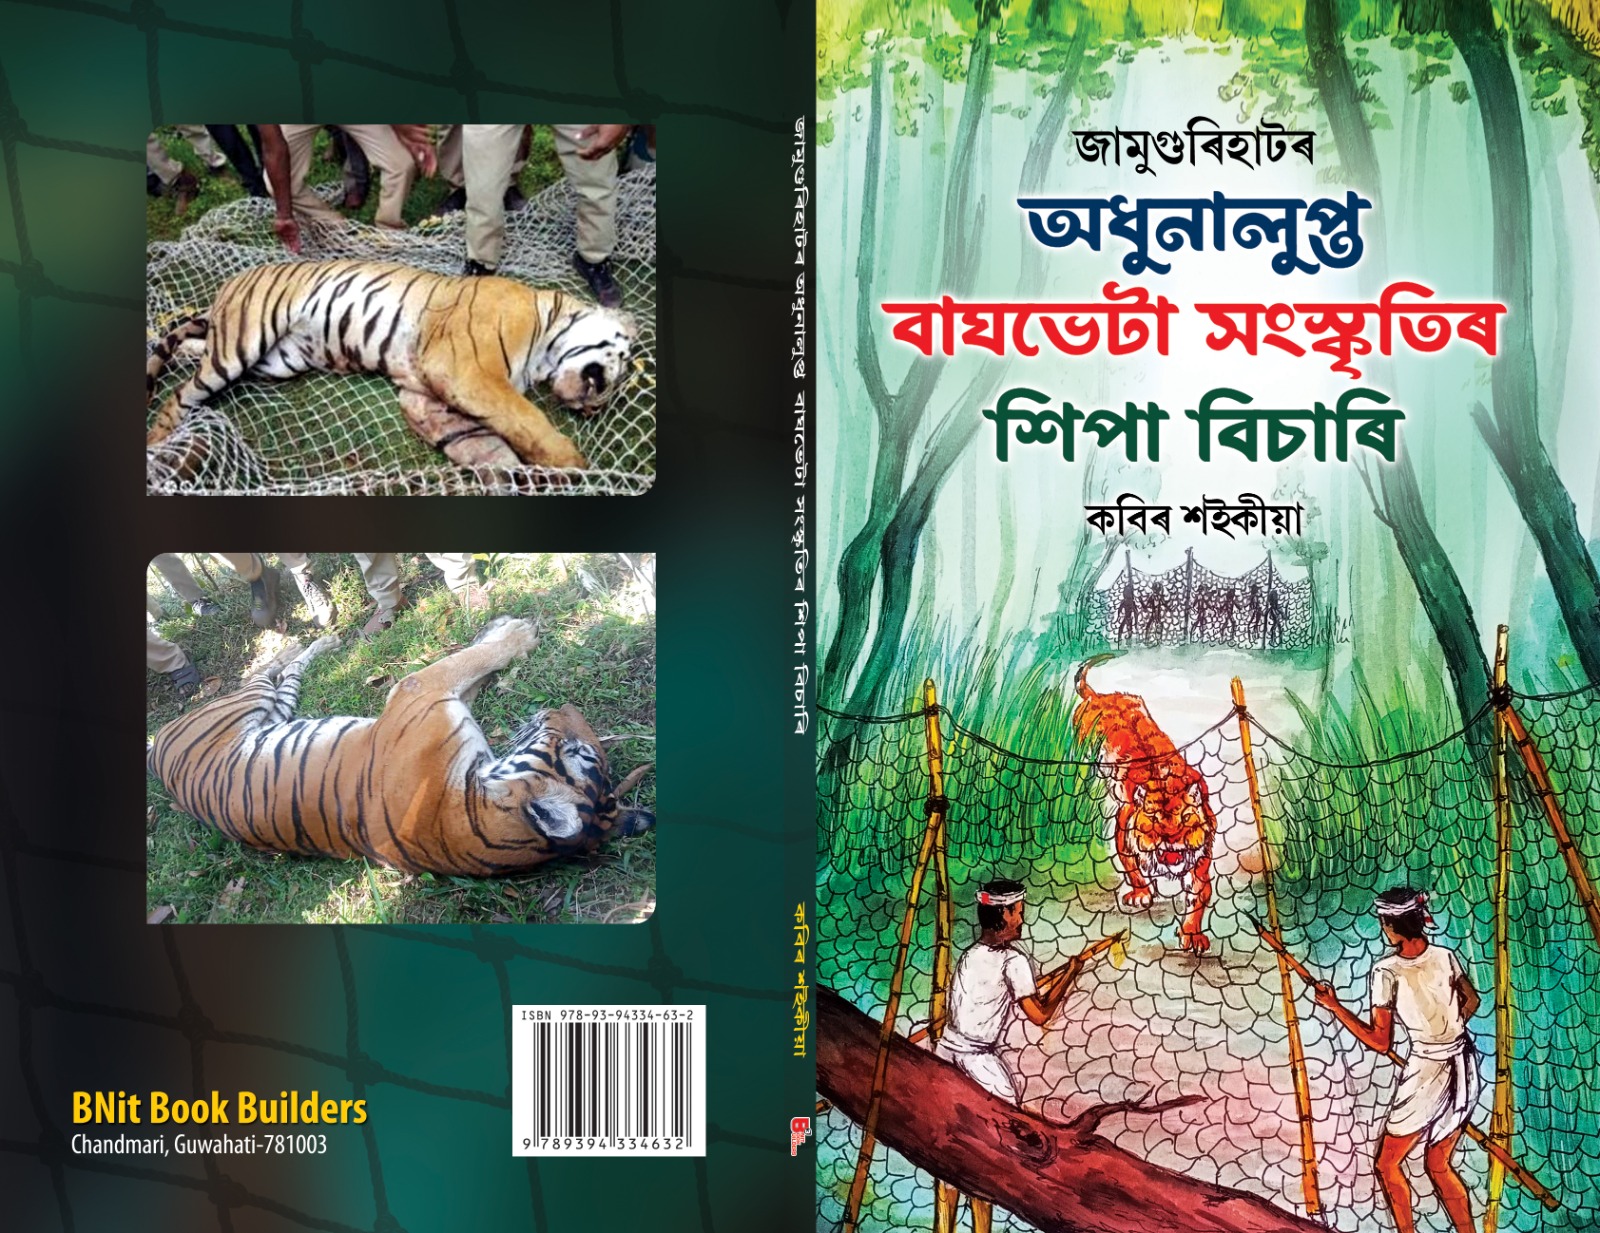 Picture of folklore based on Tiger capture stories